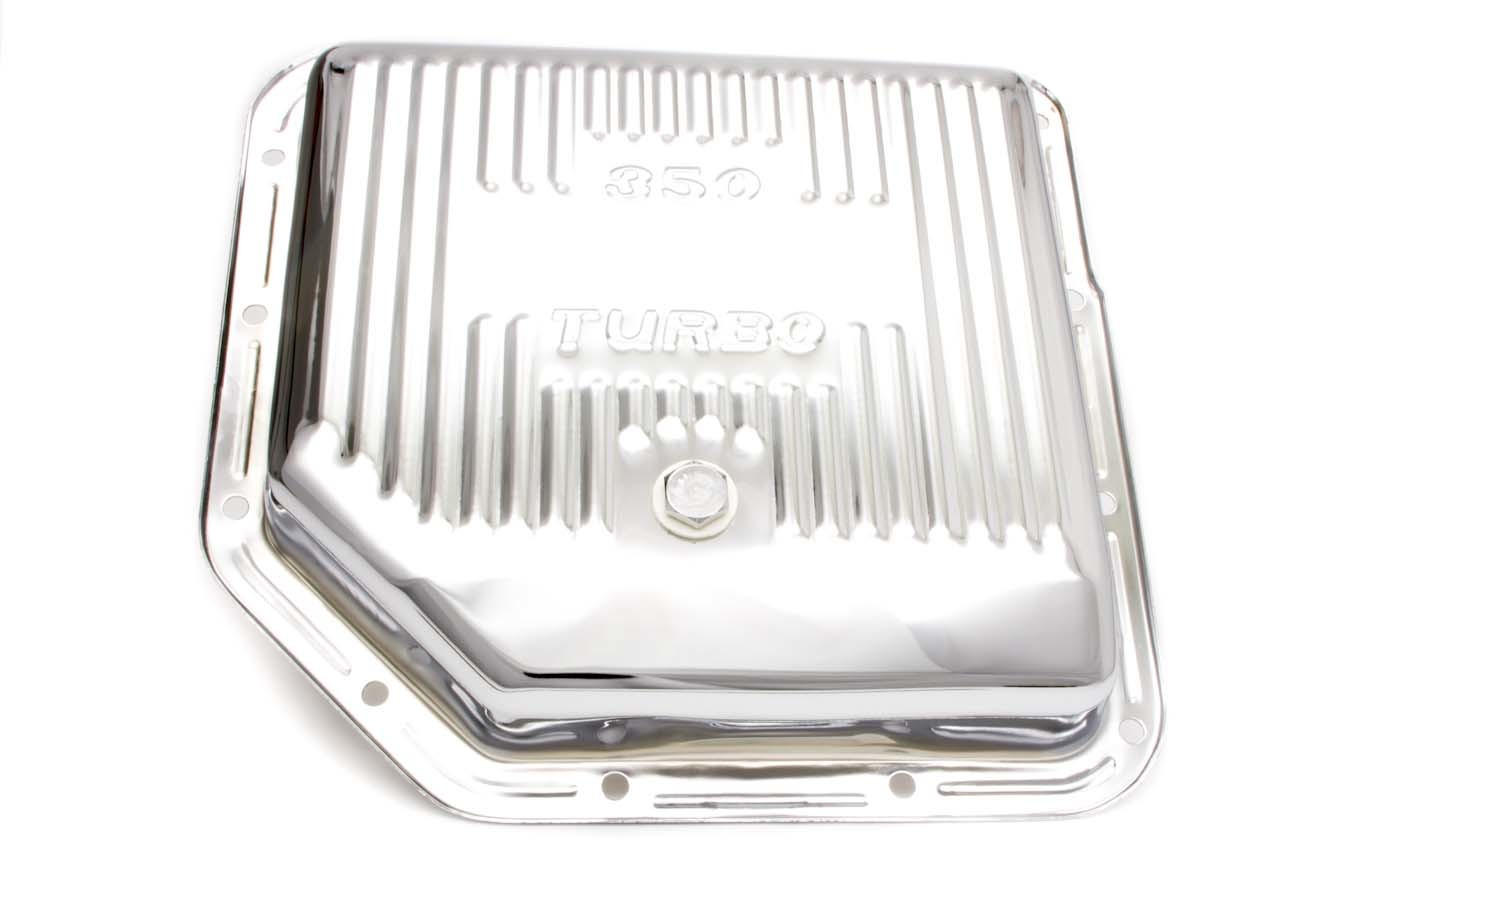 Racing Power Company R9122 Transmission Pan, Stock Depth, Finned, Steel, Chrome, TH350, Each